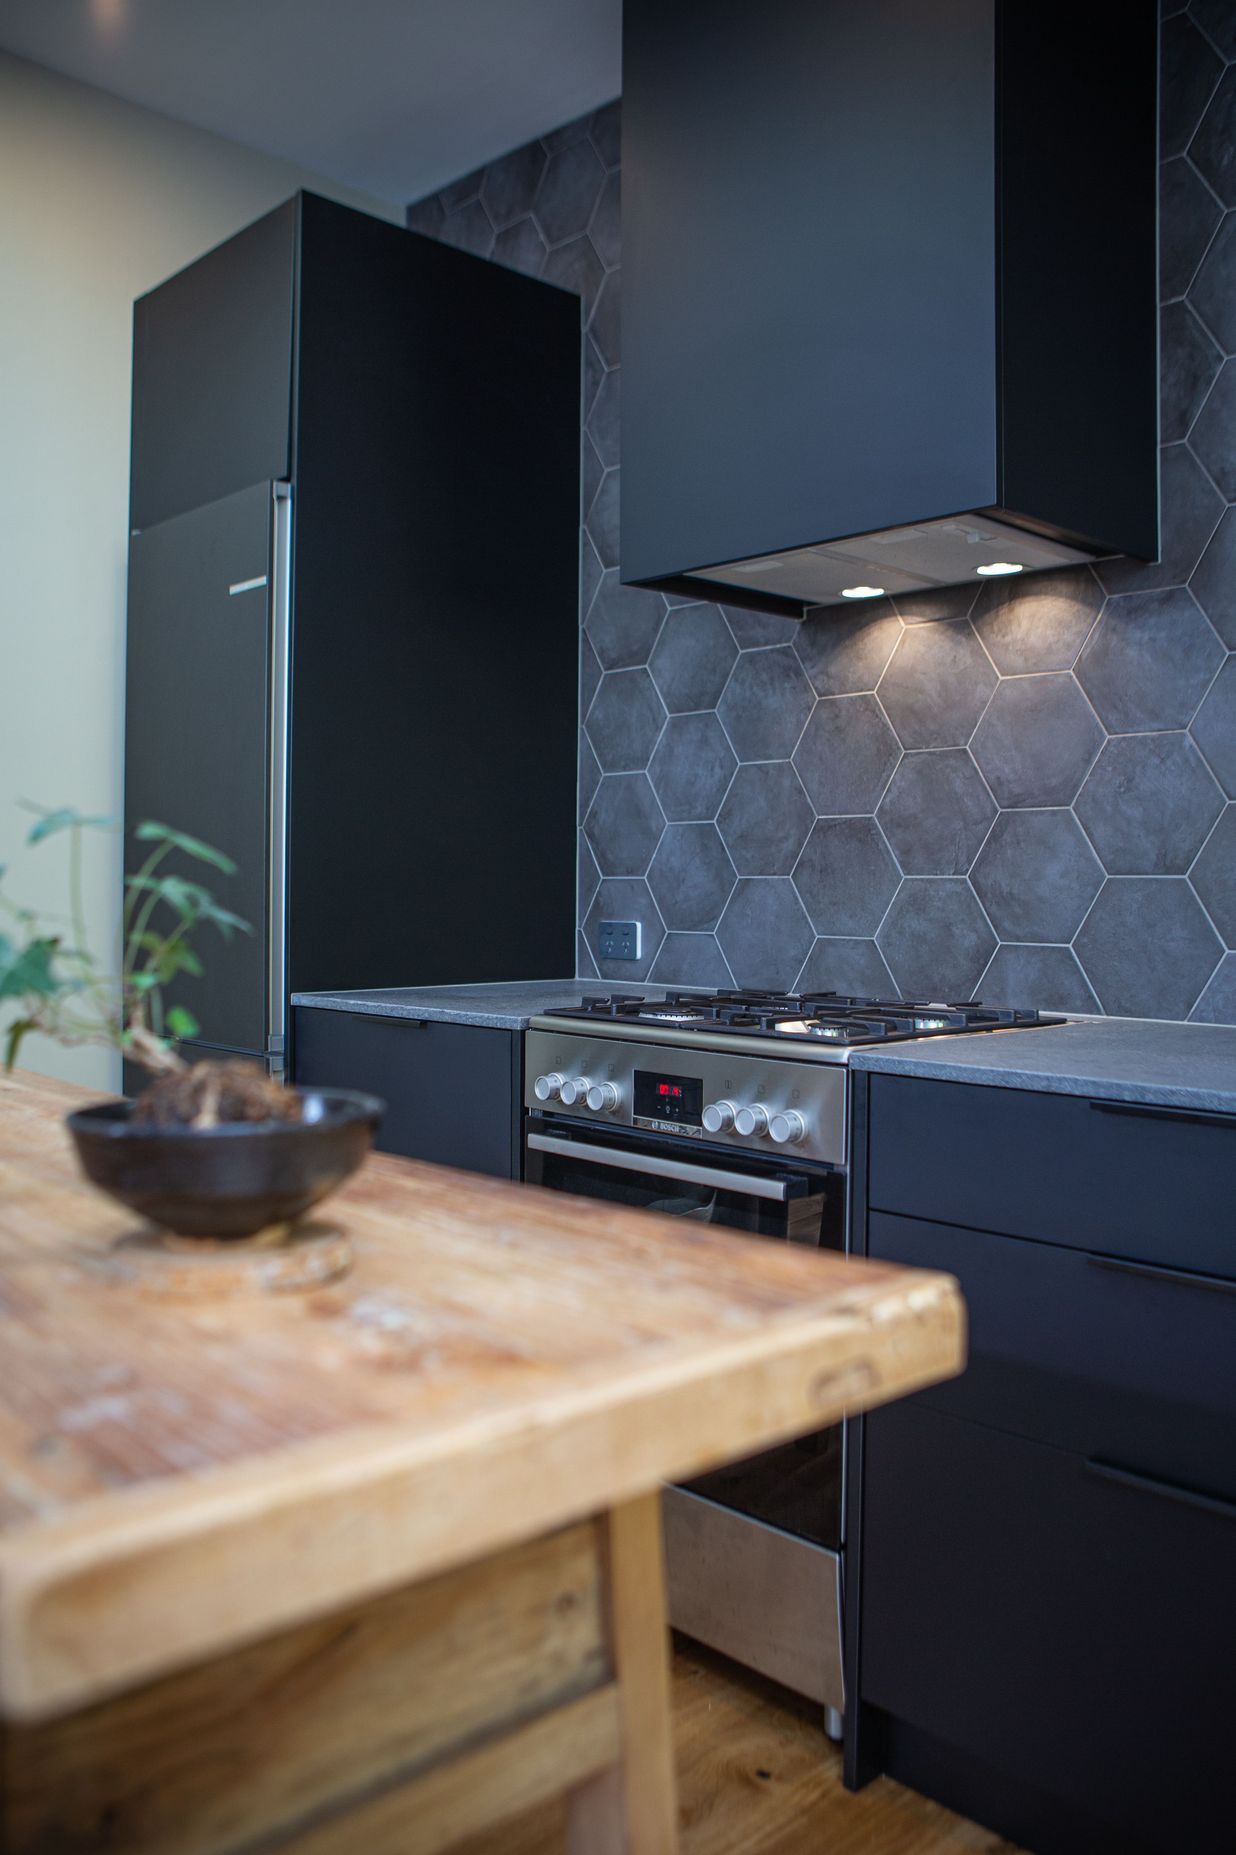 A black rangehood cover or shroud sits well against the grey and black finishes.